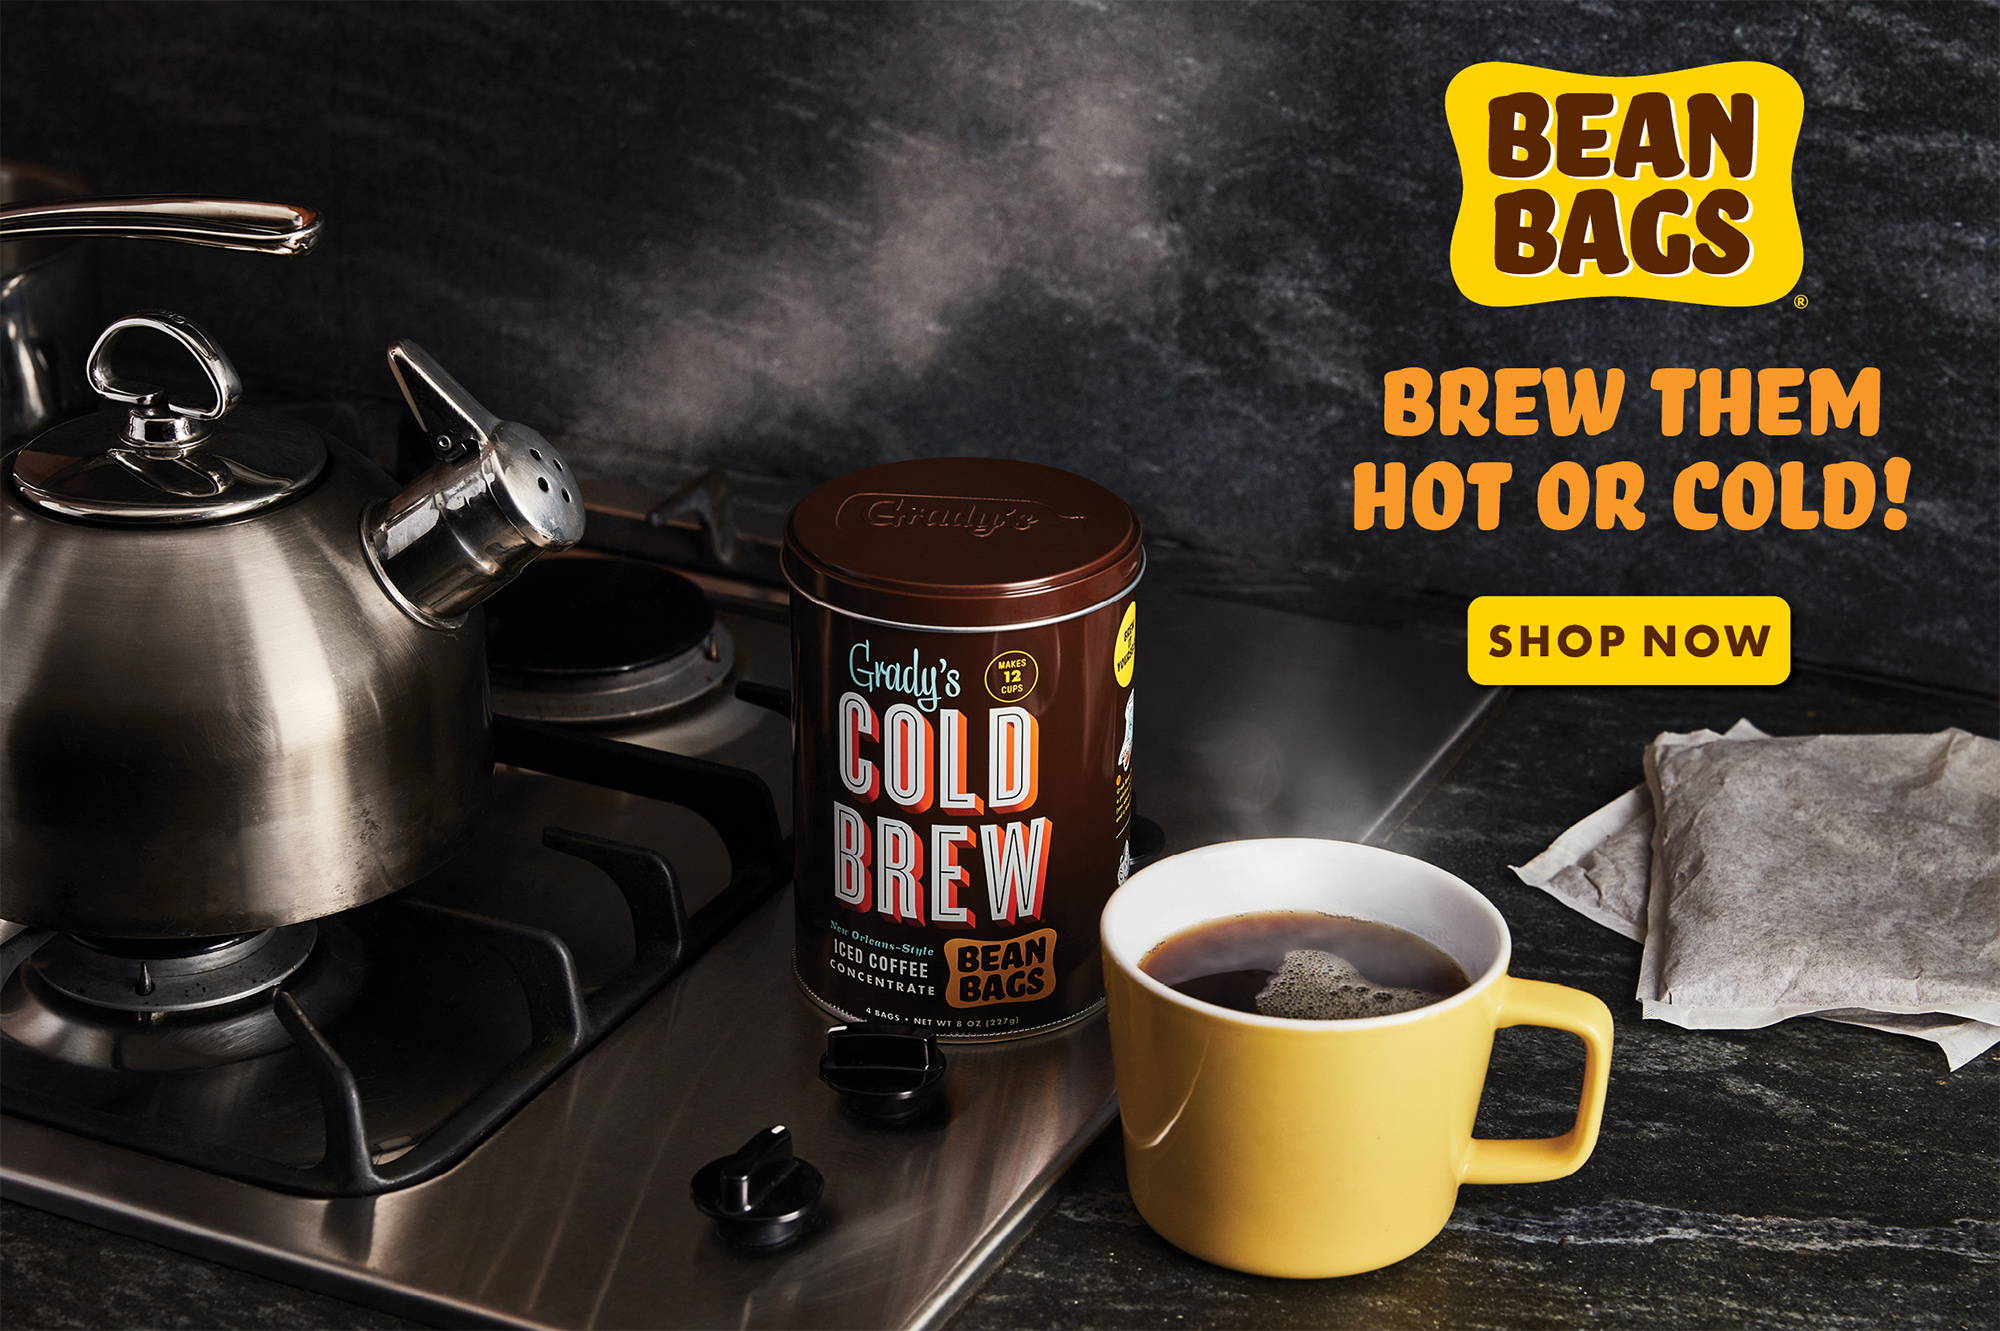 Grady's Bean Bags Brew Them Hot or Cold! Shop NOW! - Grady's Can on Stove Top with Steaming Cup and Bean Bags